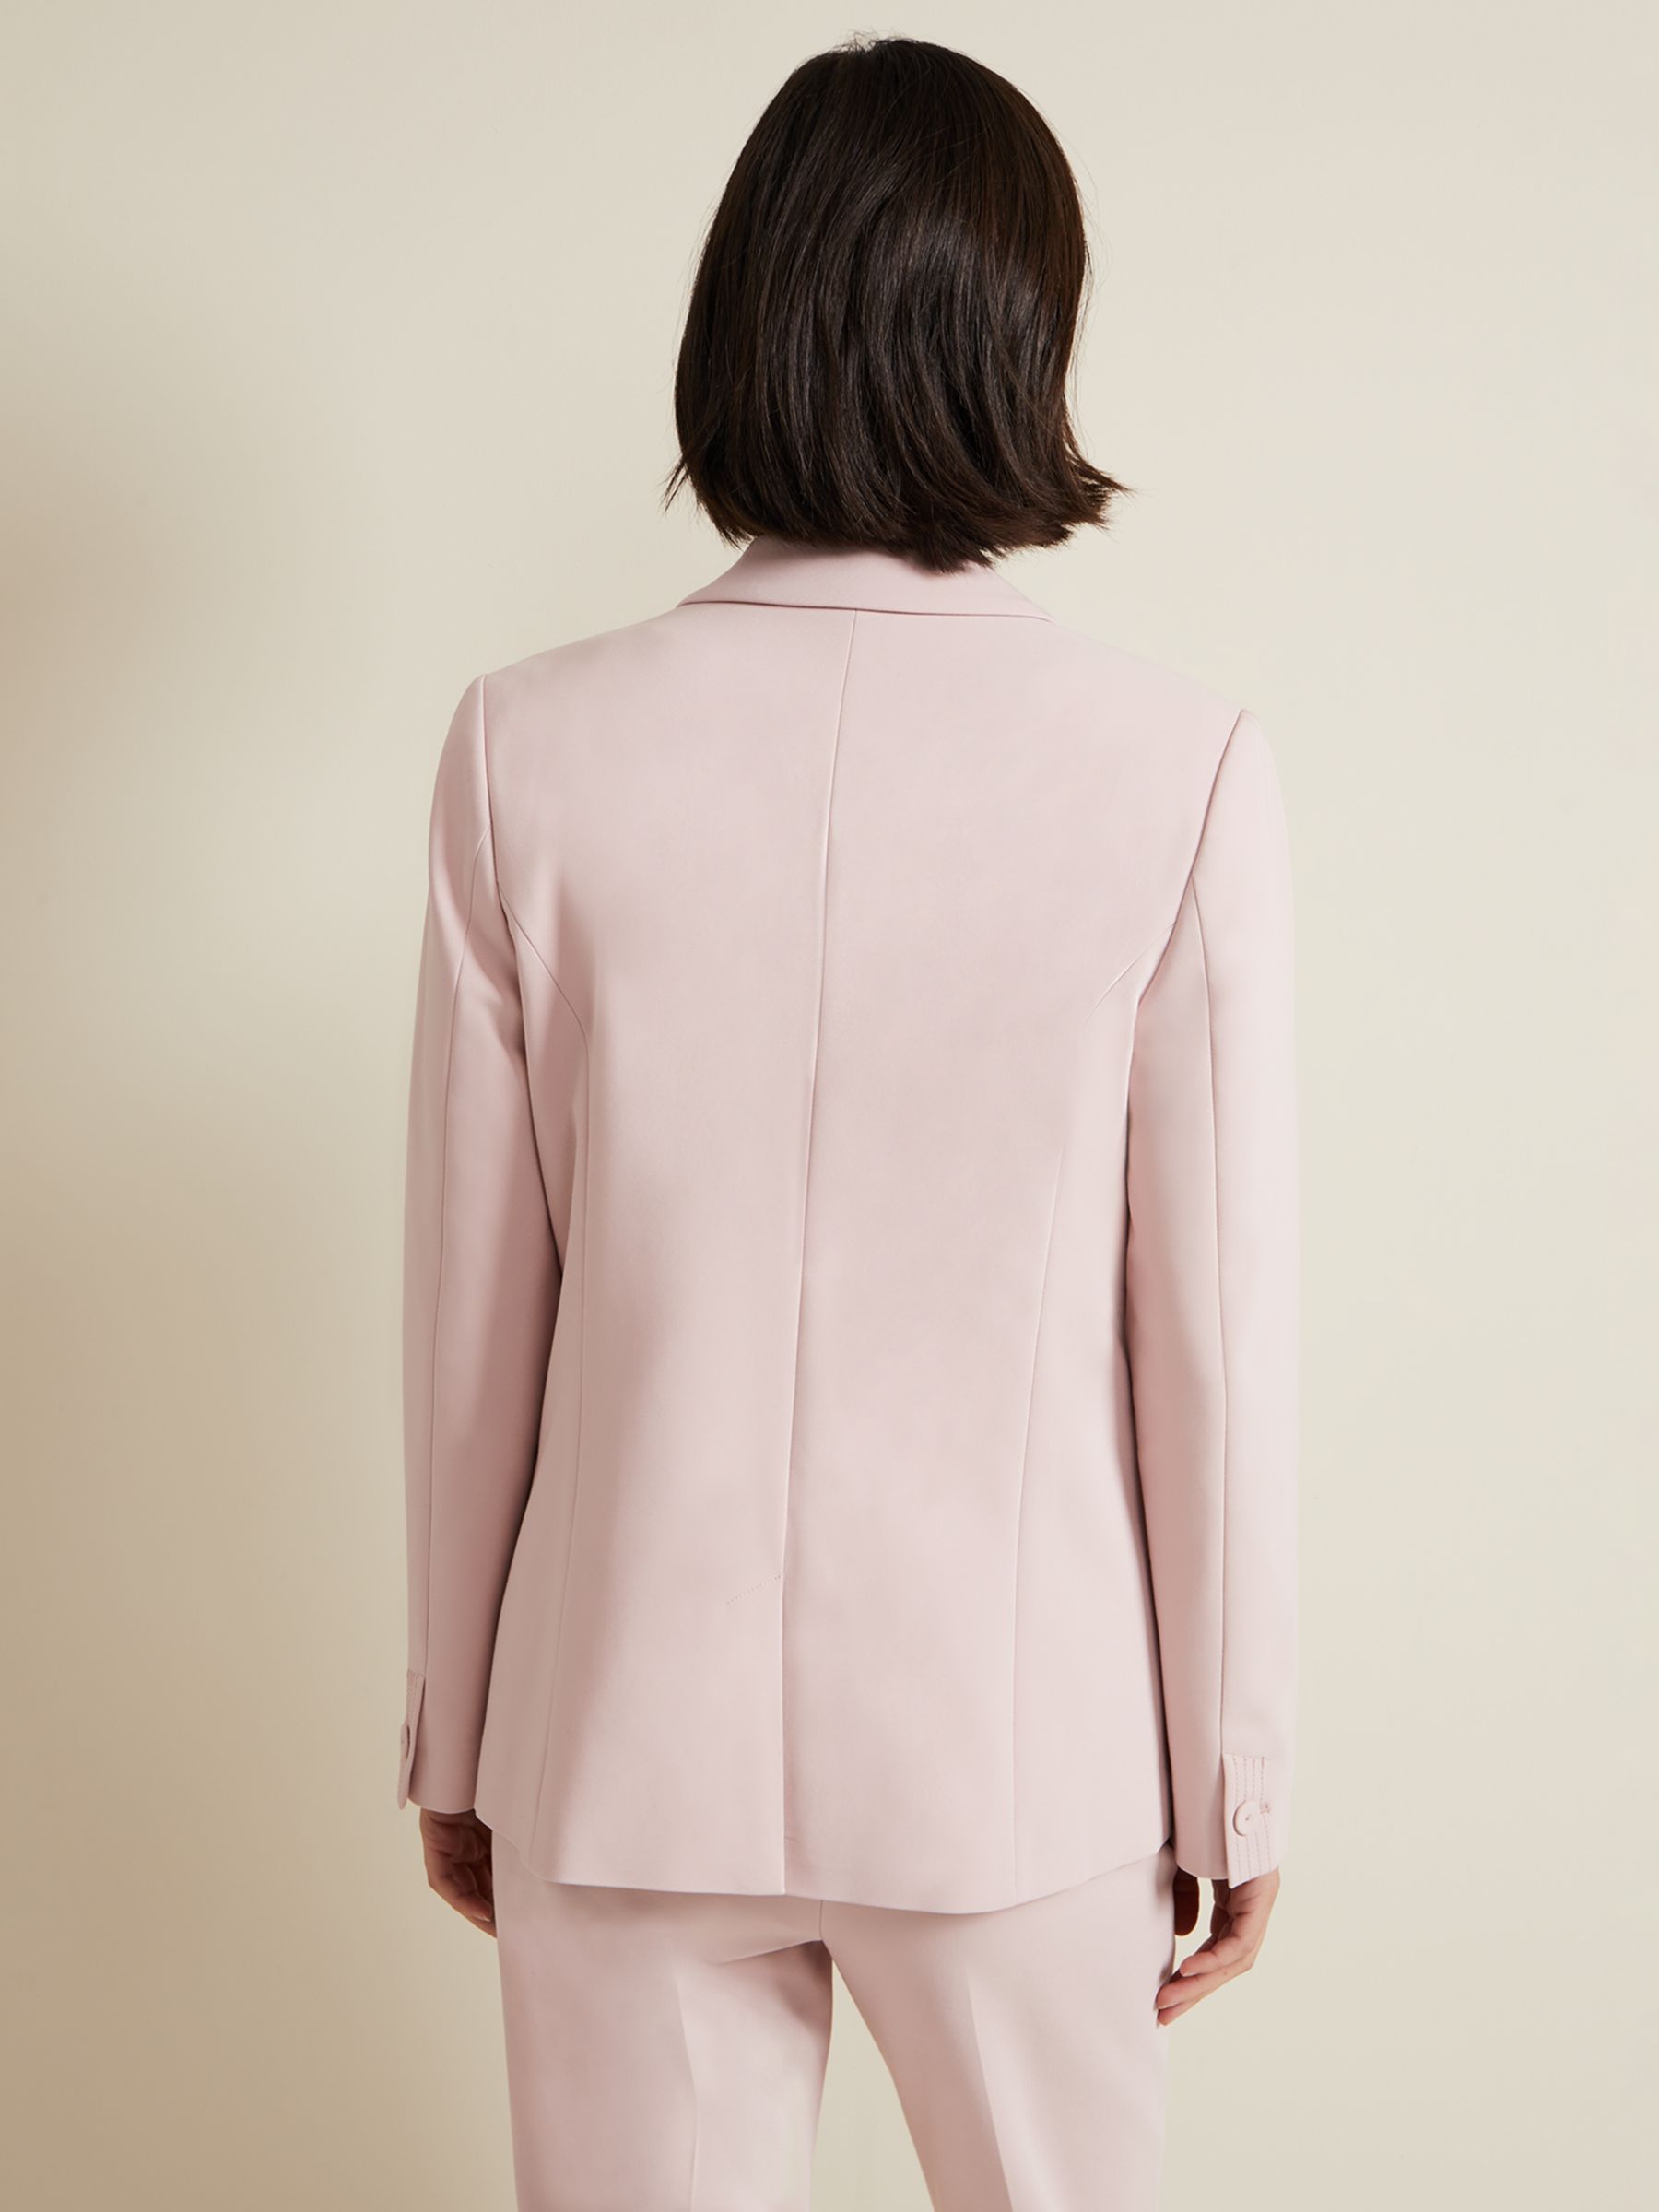 Buy Phase Eight Ulrica Suit Jacket Online at johnlewis.com